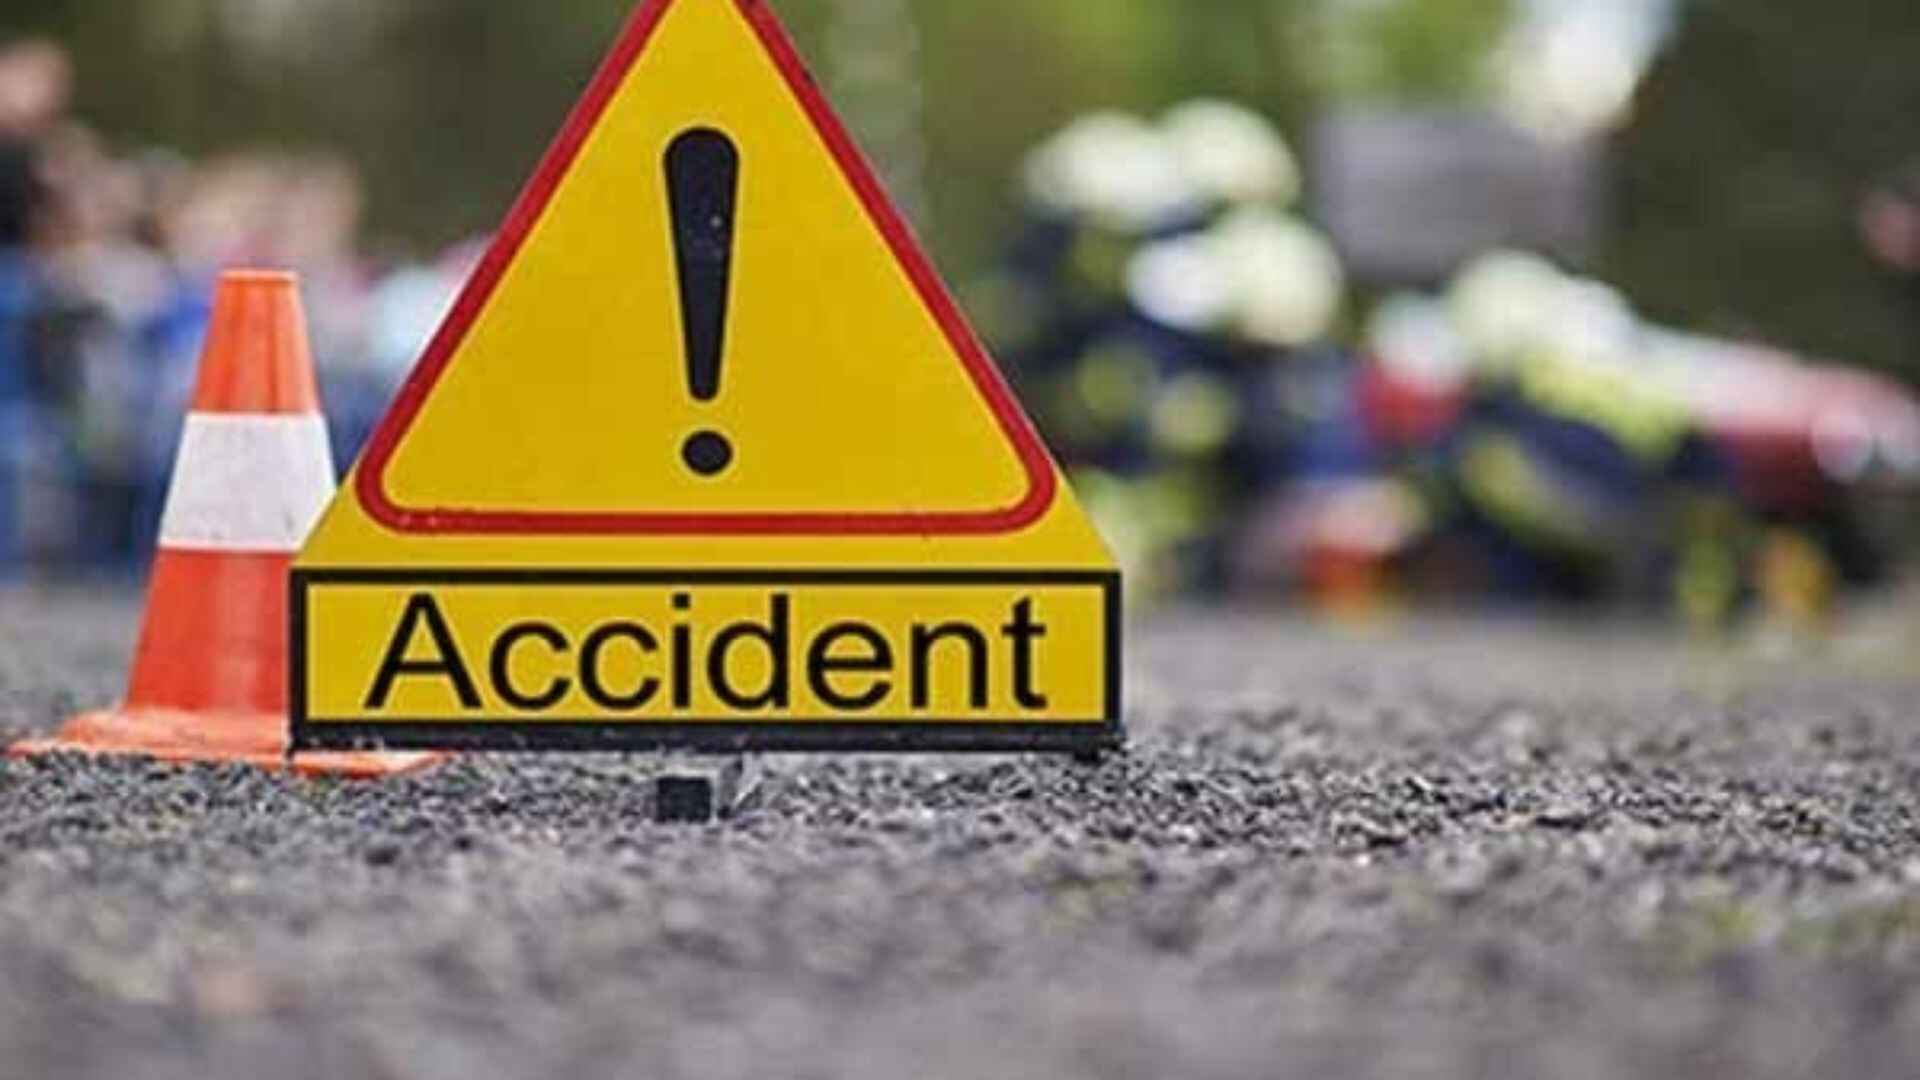 MP: Fatal Collision On Indore-Ahmedabad Highway Leaves 8 Dead